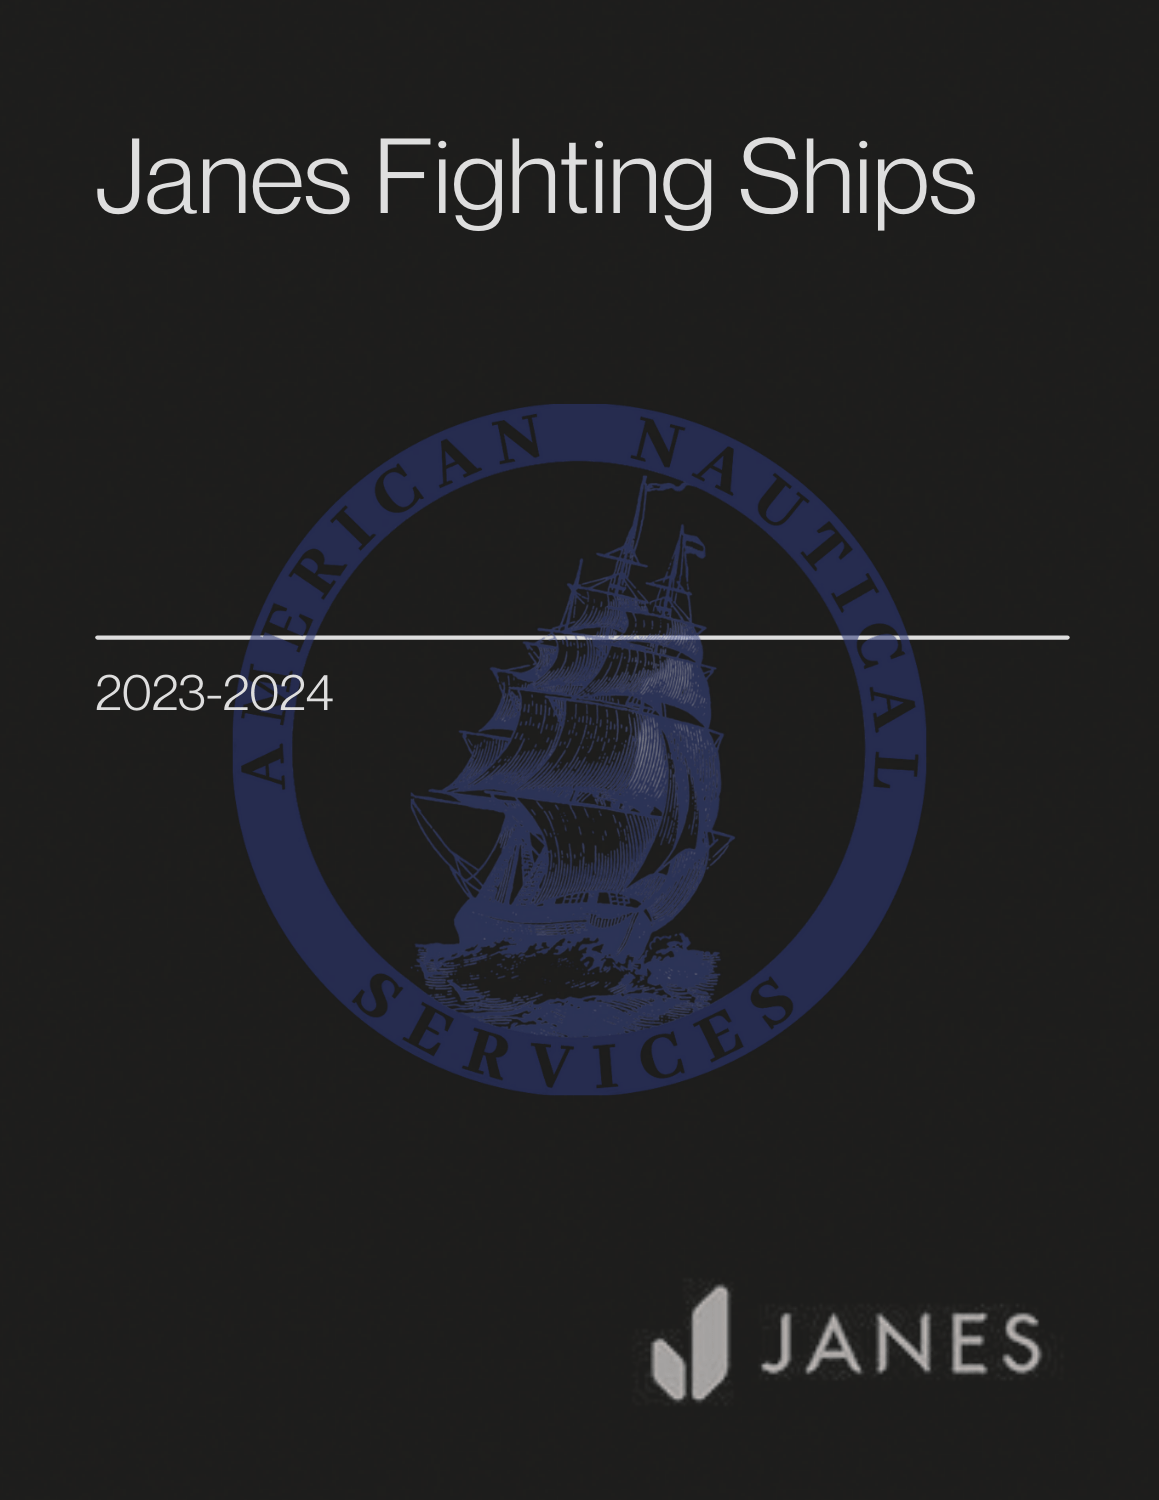 Jane's Fighting Ships Yearbook, 2023/2024 Edition